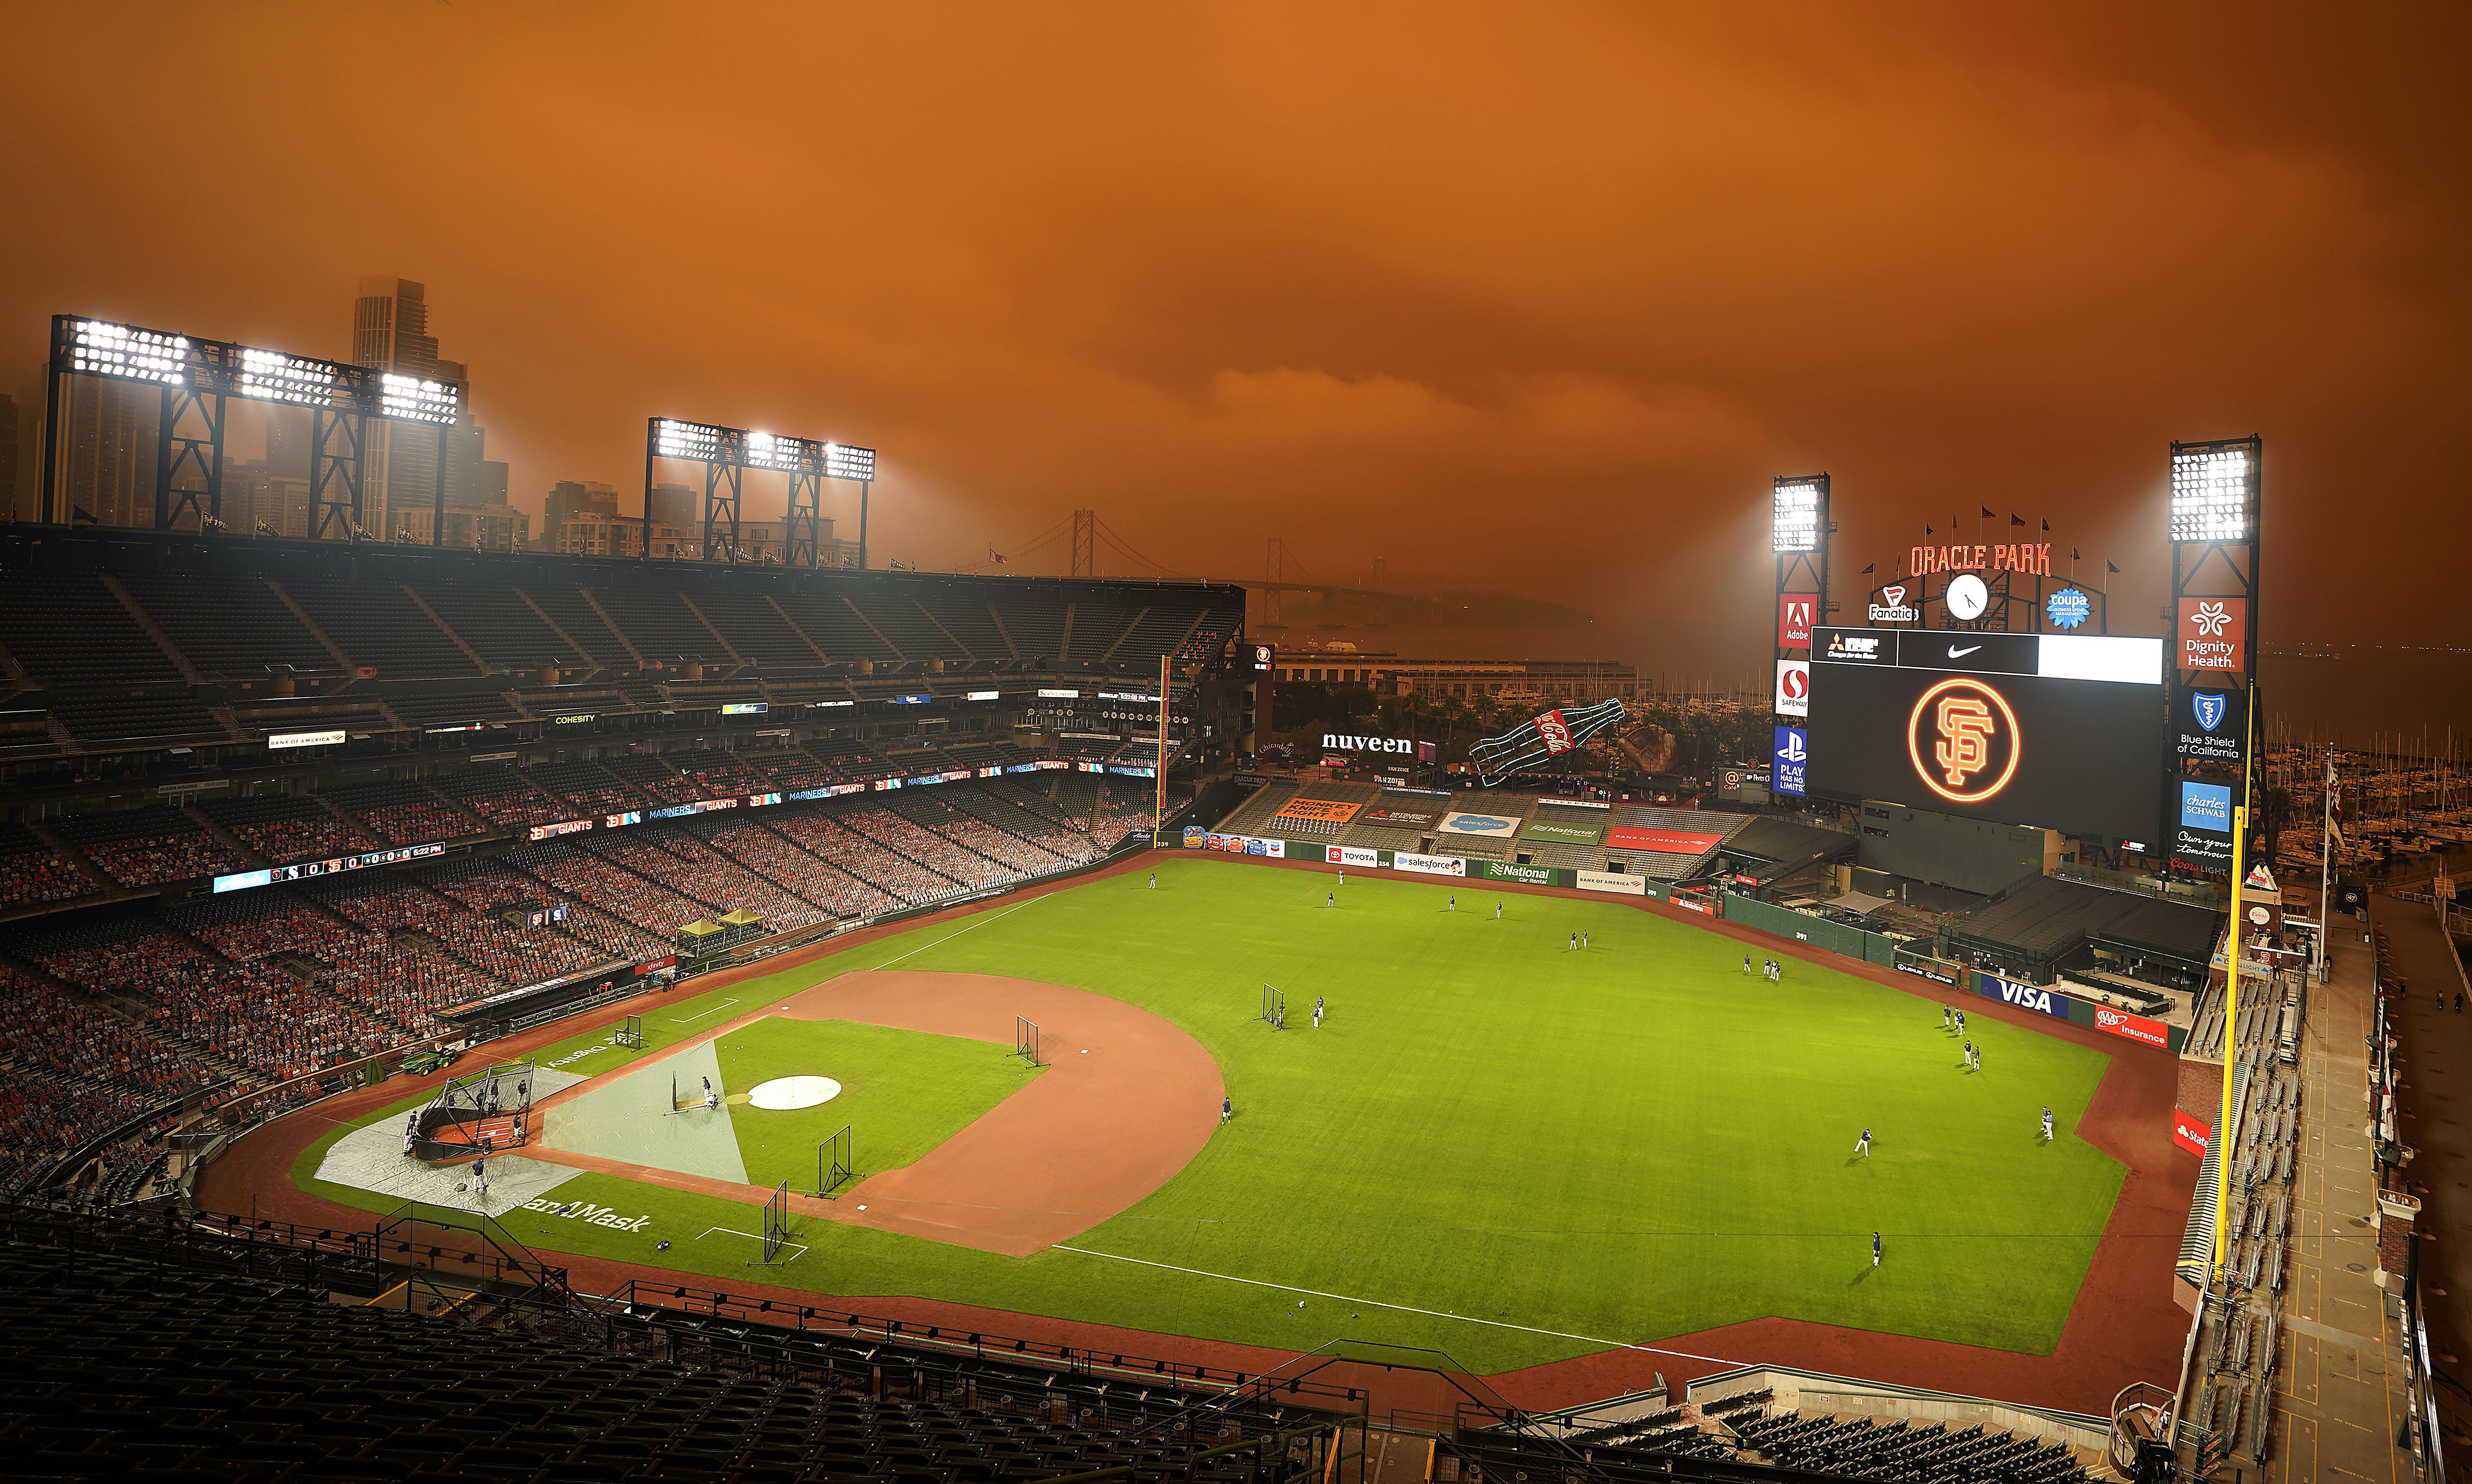 Smoke from nearby wildfires creates eerie baseball scene at Oracle